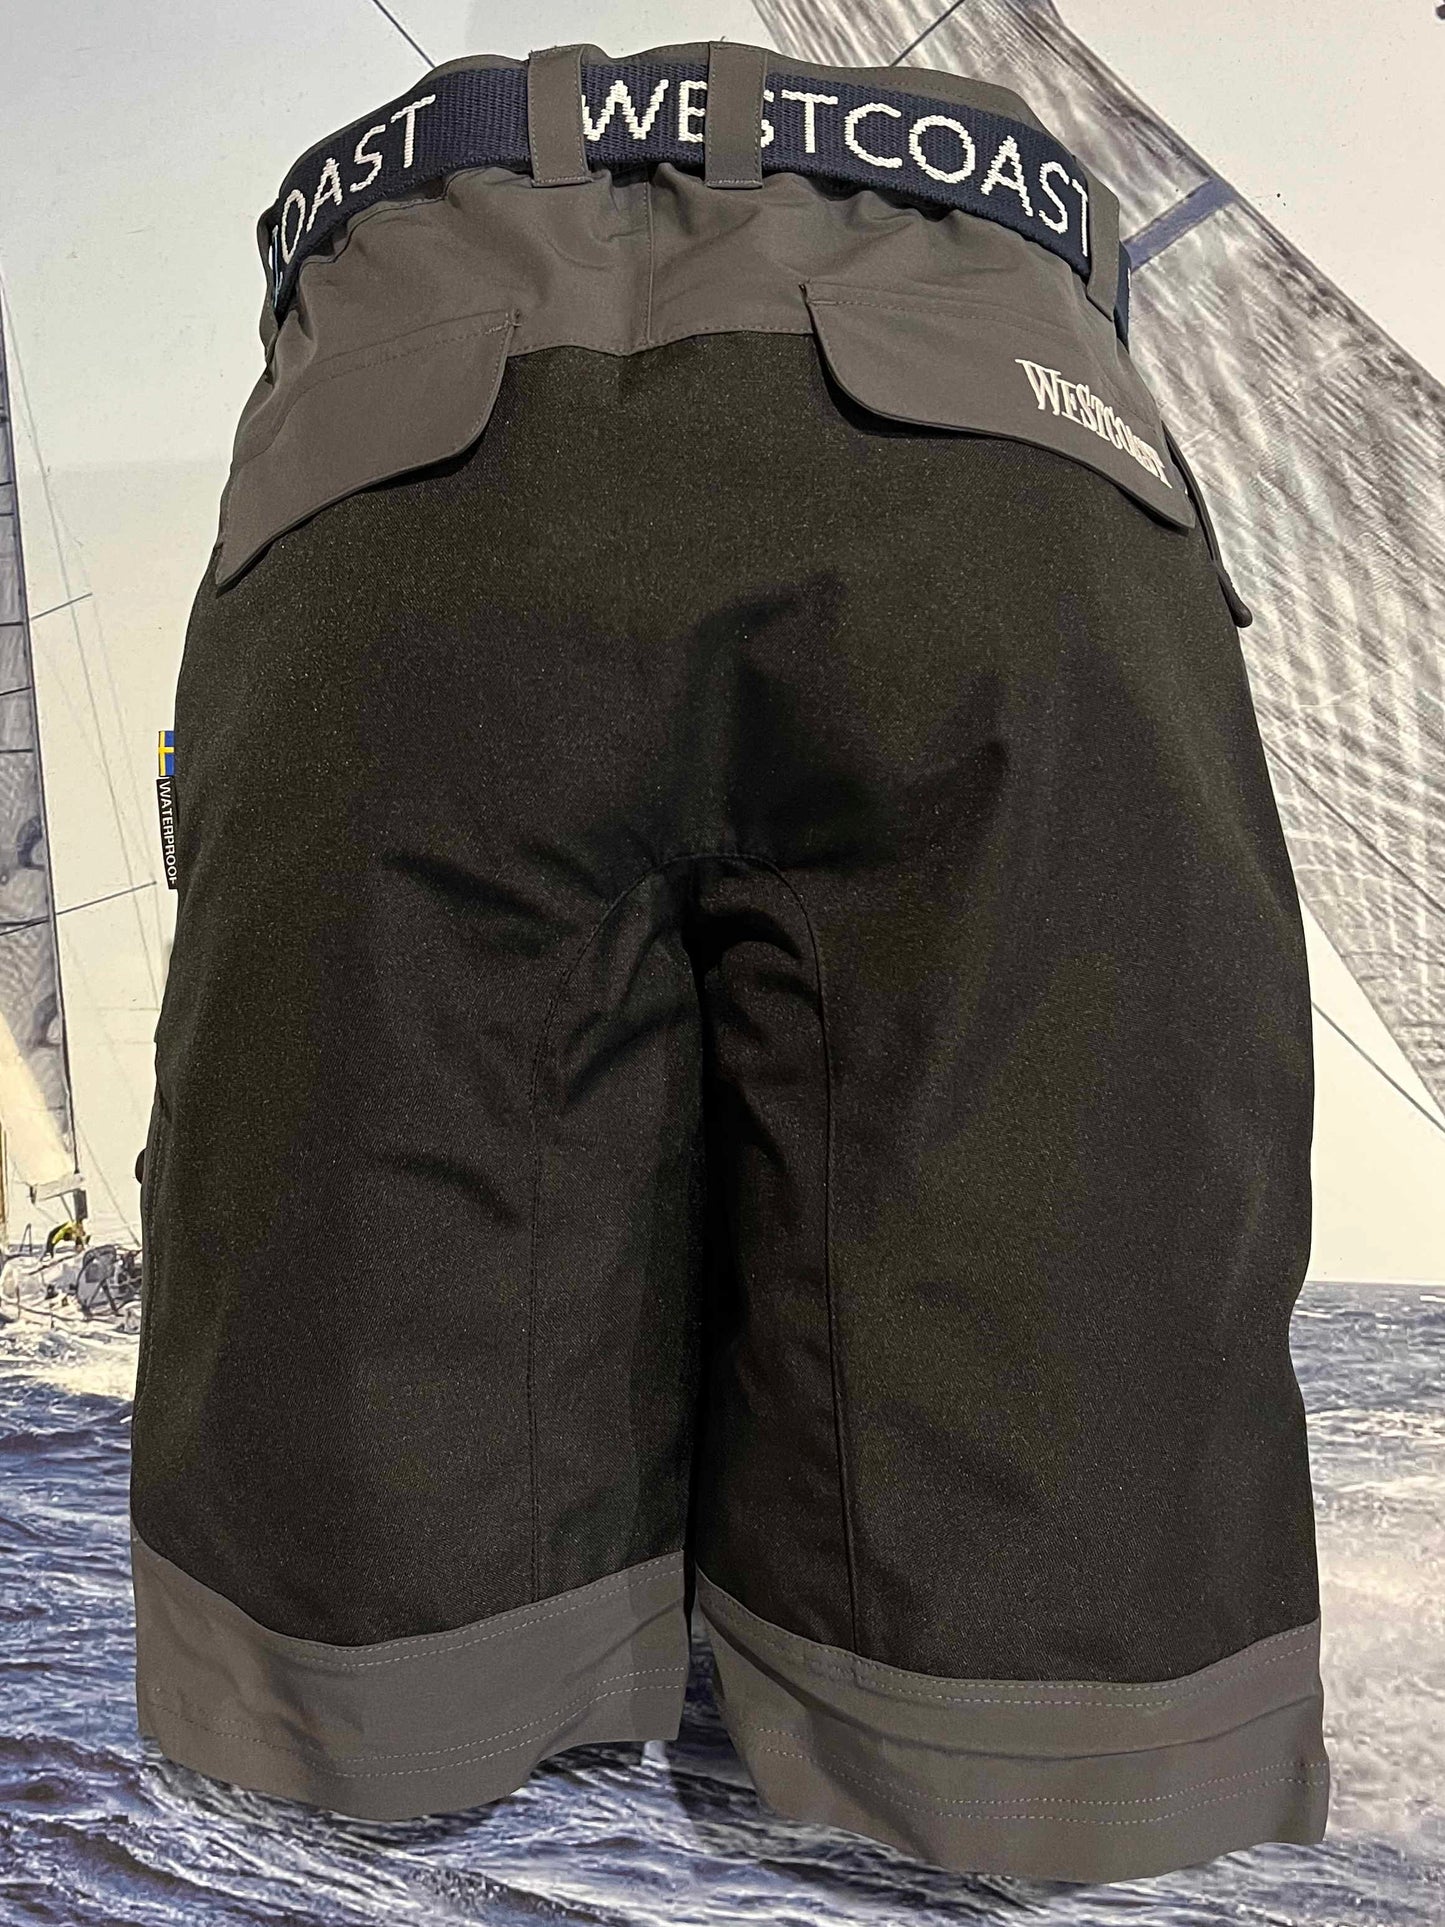 Men's SAILING SHORTS, fast dry, outdoor